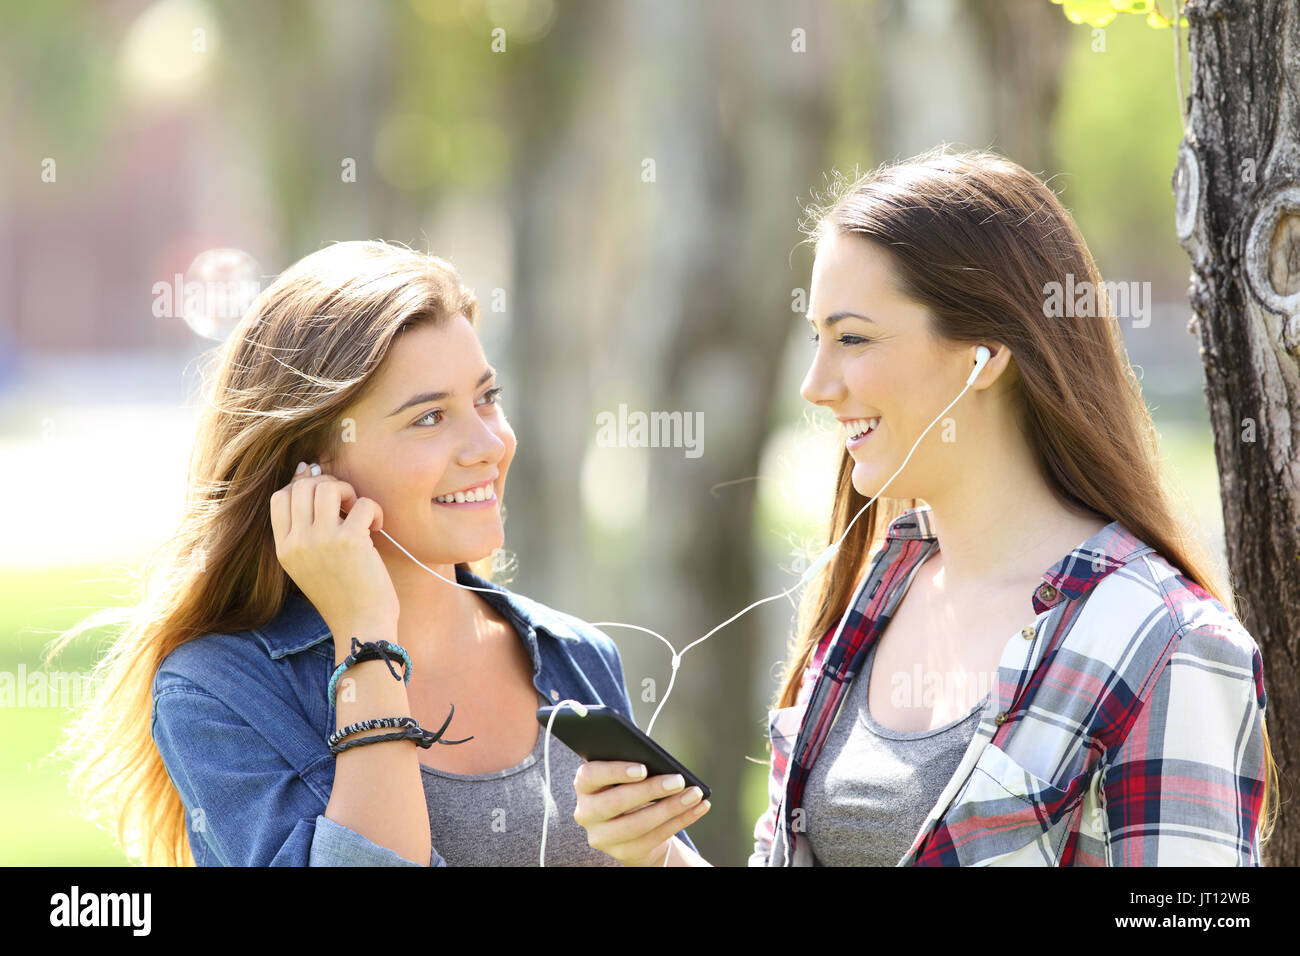 Two happy friends sharing on line music with ear buds outdoors in a park Stock Photo